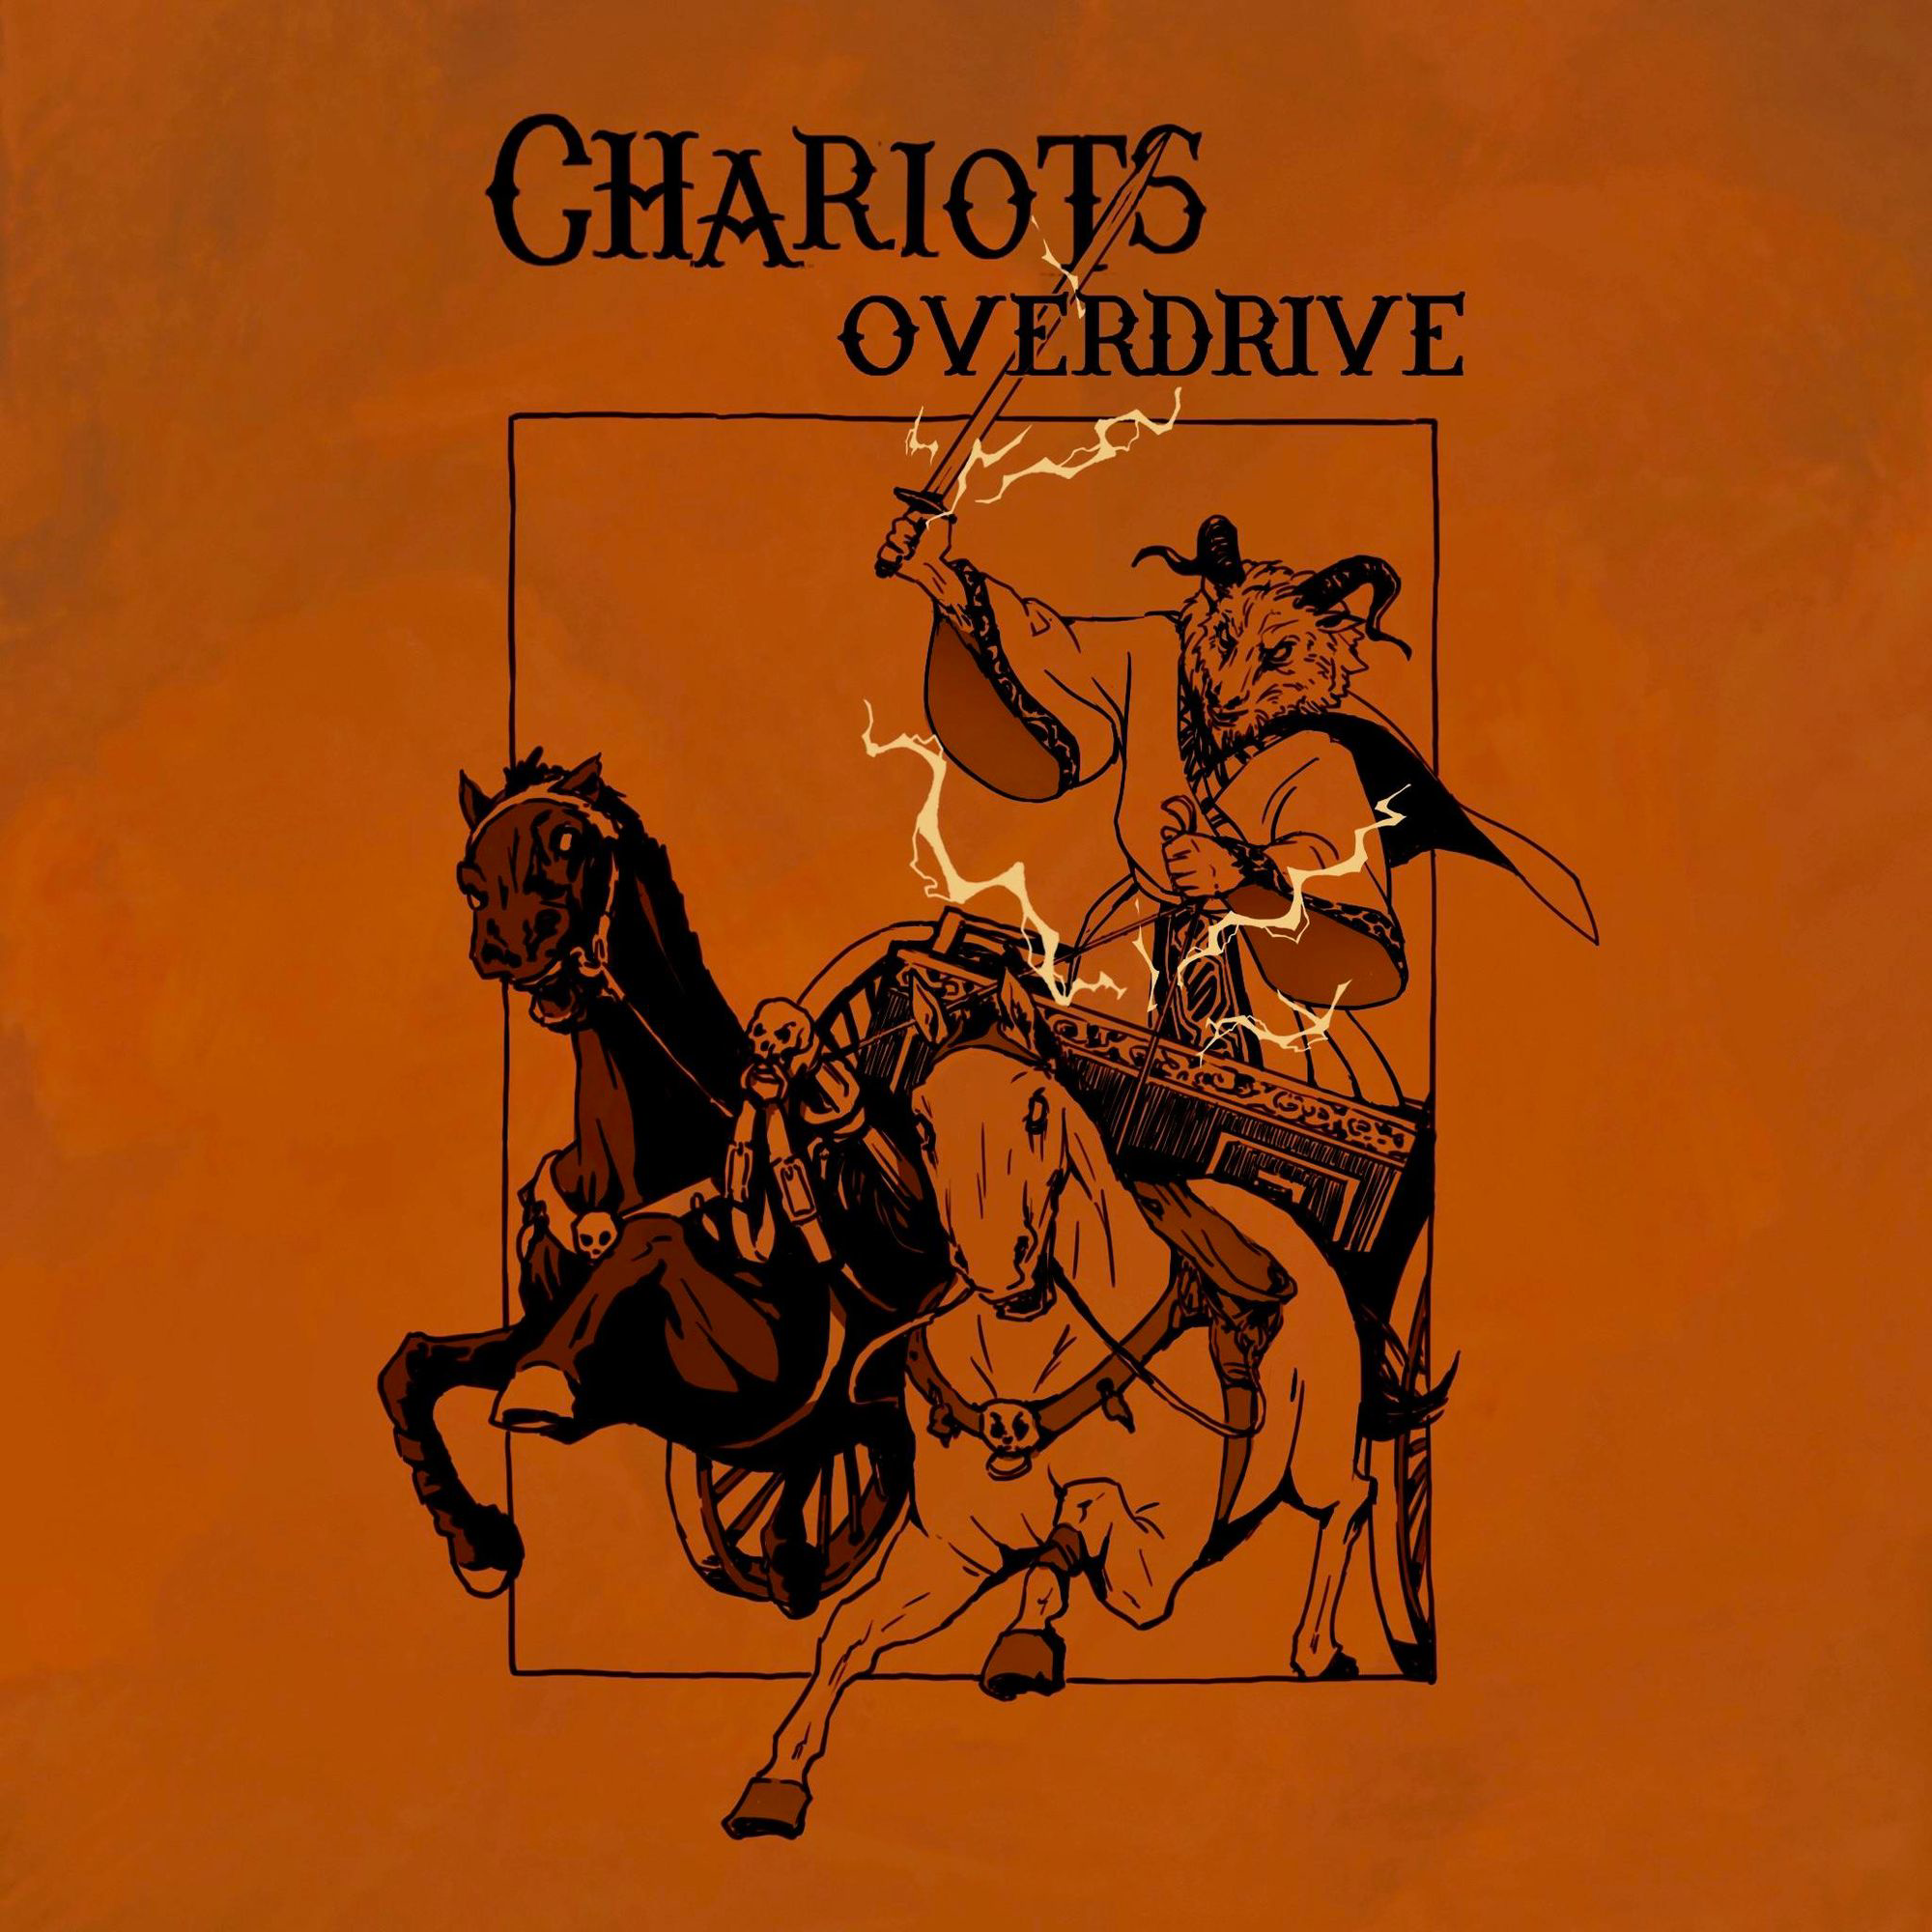 Interview with CHARIOTS OVERDRIVE